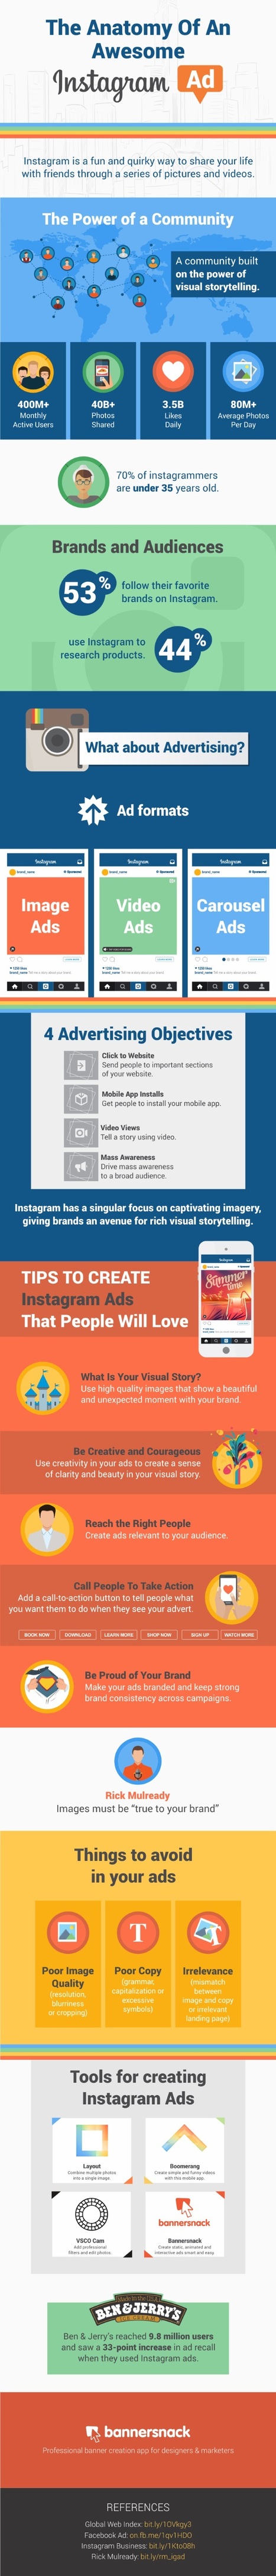 Elements of a Successful Instagram Ad #Infographic | Latest Social Media News | Scoop.it